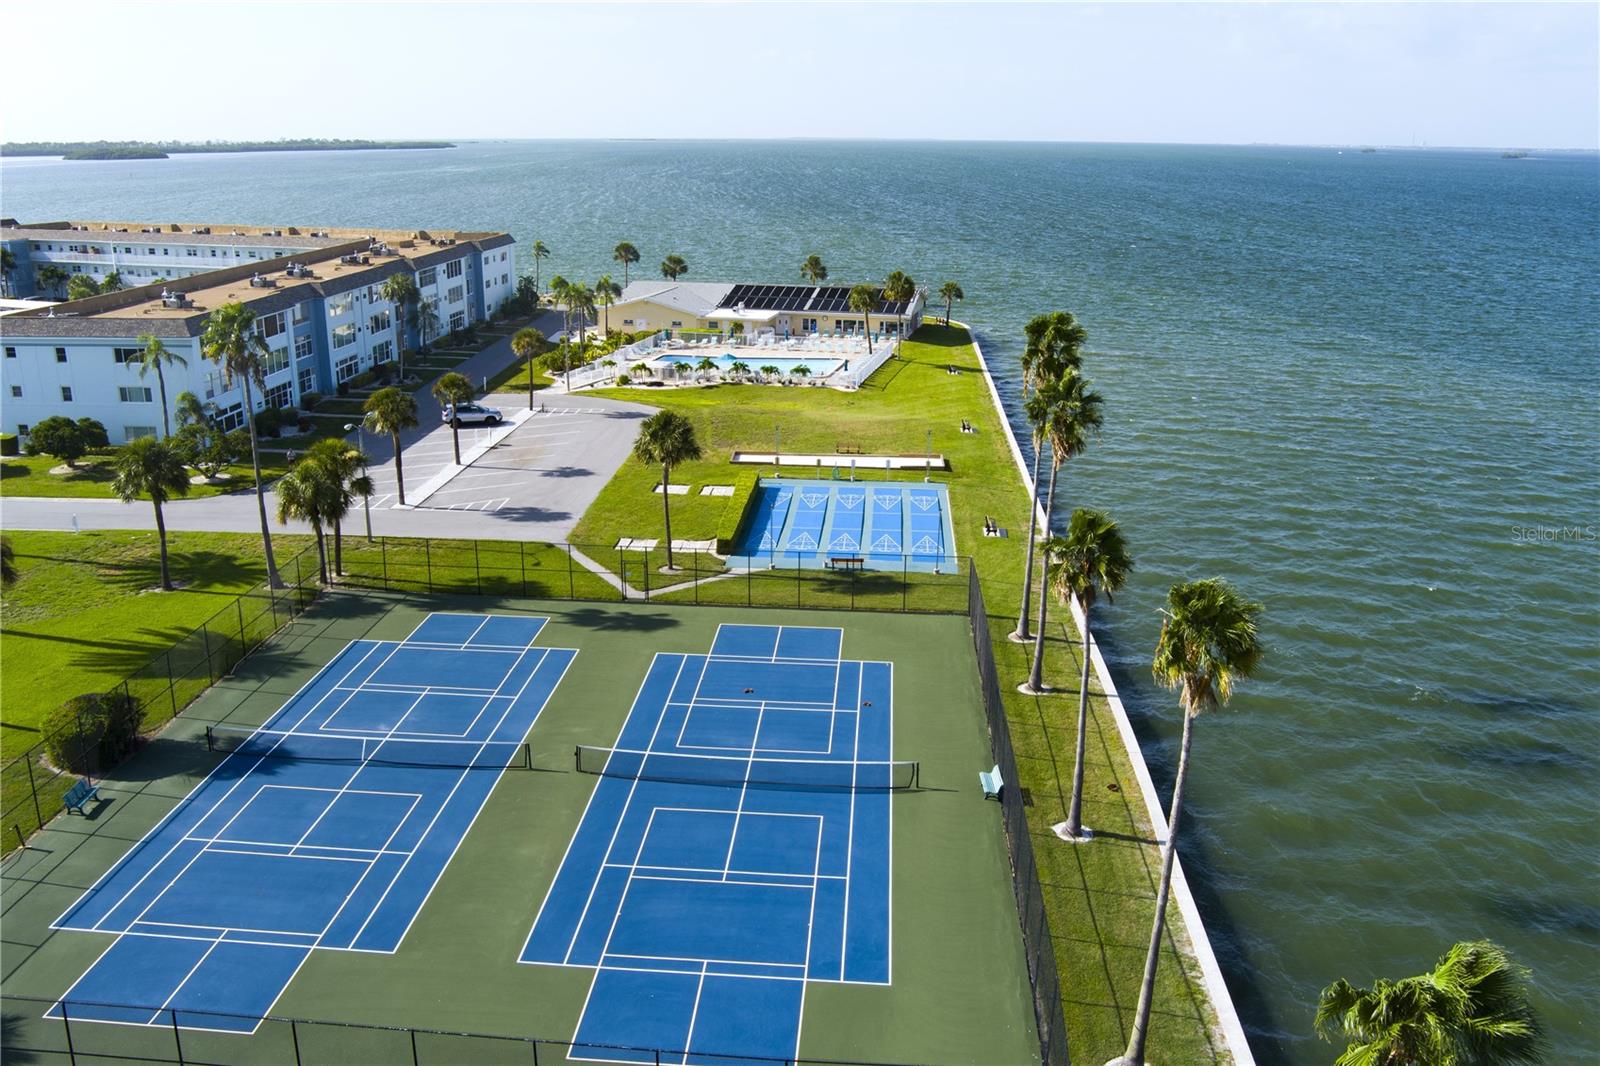 8 Glencoe PL #308, Dunedin FL. 2-Bed, 1 Bath top floor Condo. Located in the Royal Stewart Arms 55+ Community featuring heated pool, Tennis courts, Shuffleboard, Pickleball, community center, sauna, fishing pier, and so much more! Located on the beautiful Dunedin Causeway just before Honeymoon State Park & Beaches.